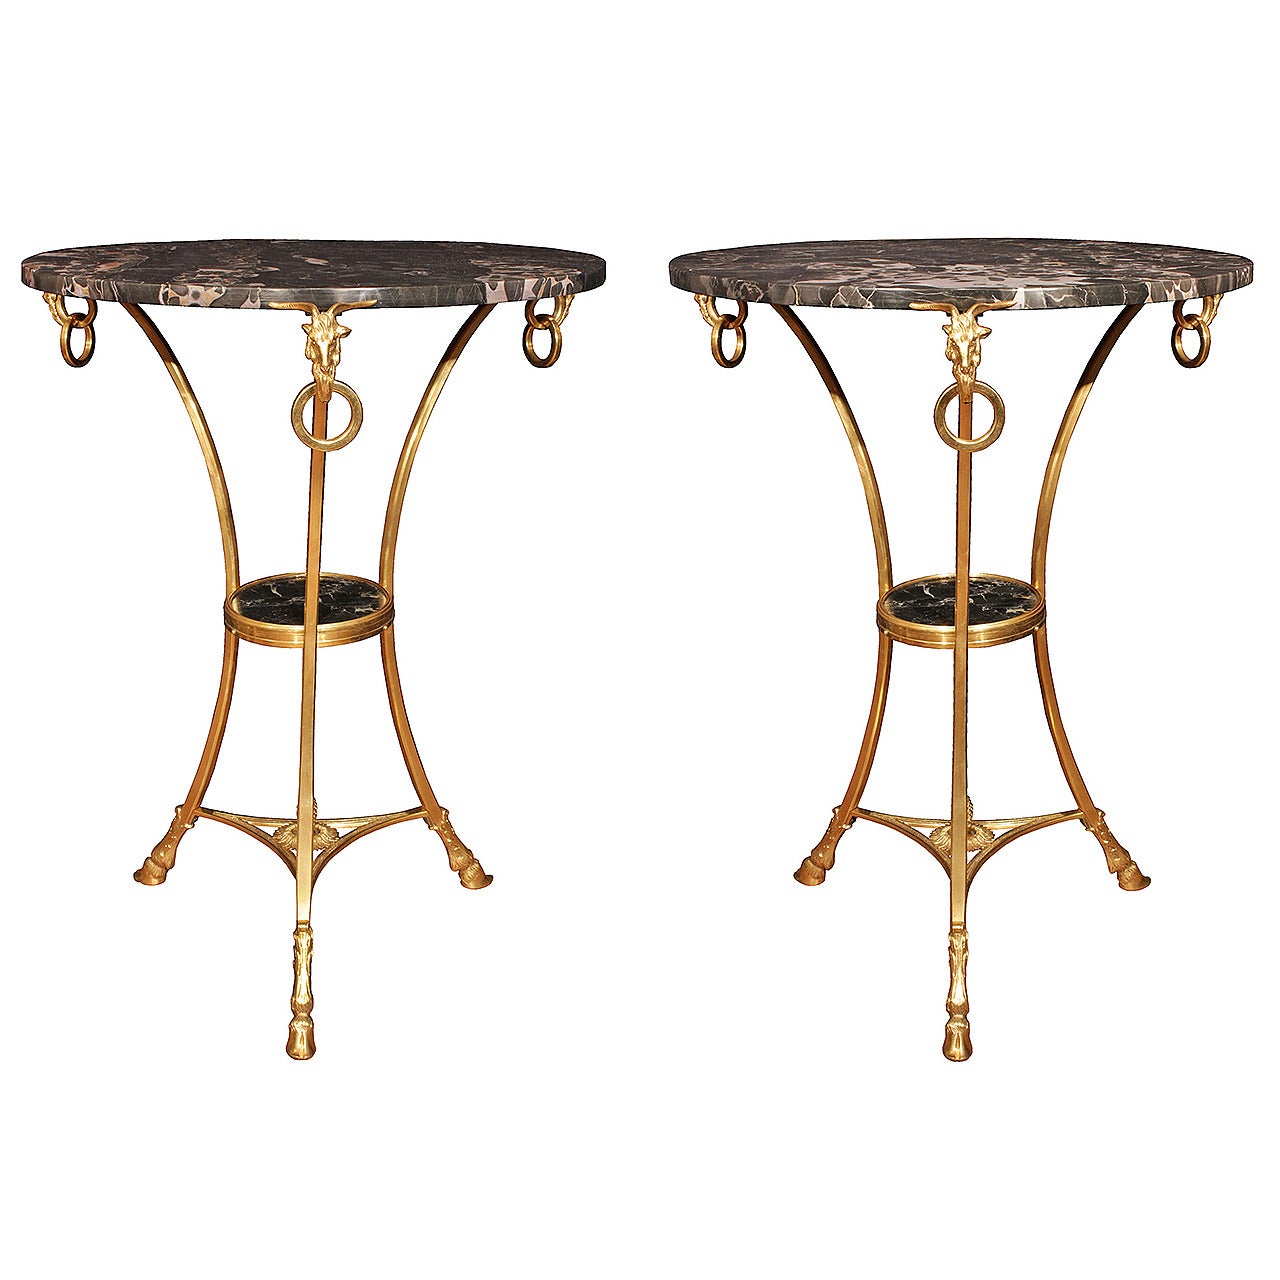 French 19th Century Louis XVI Style Ormolu and Marble Guéridons